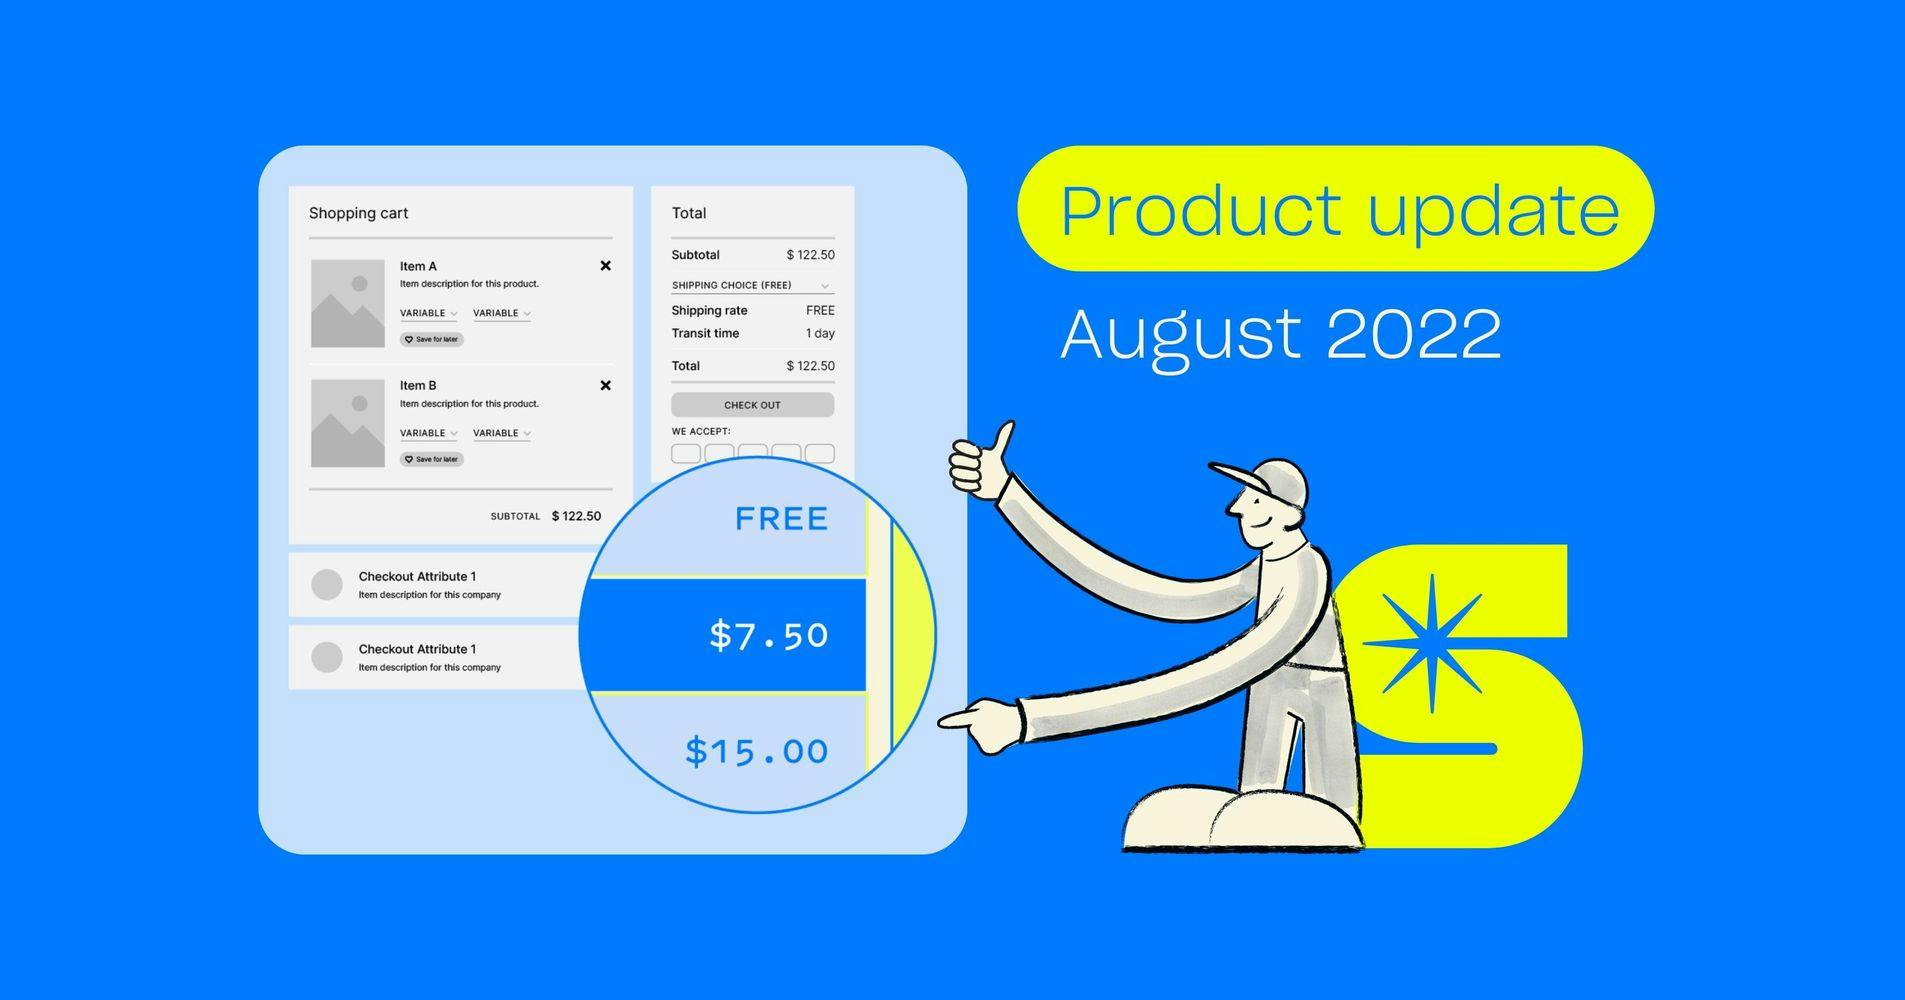 Product update: August 2022